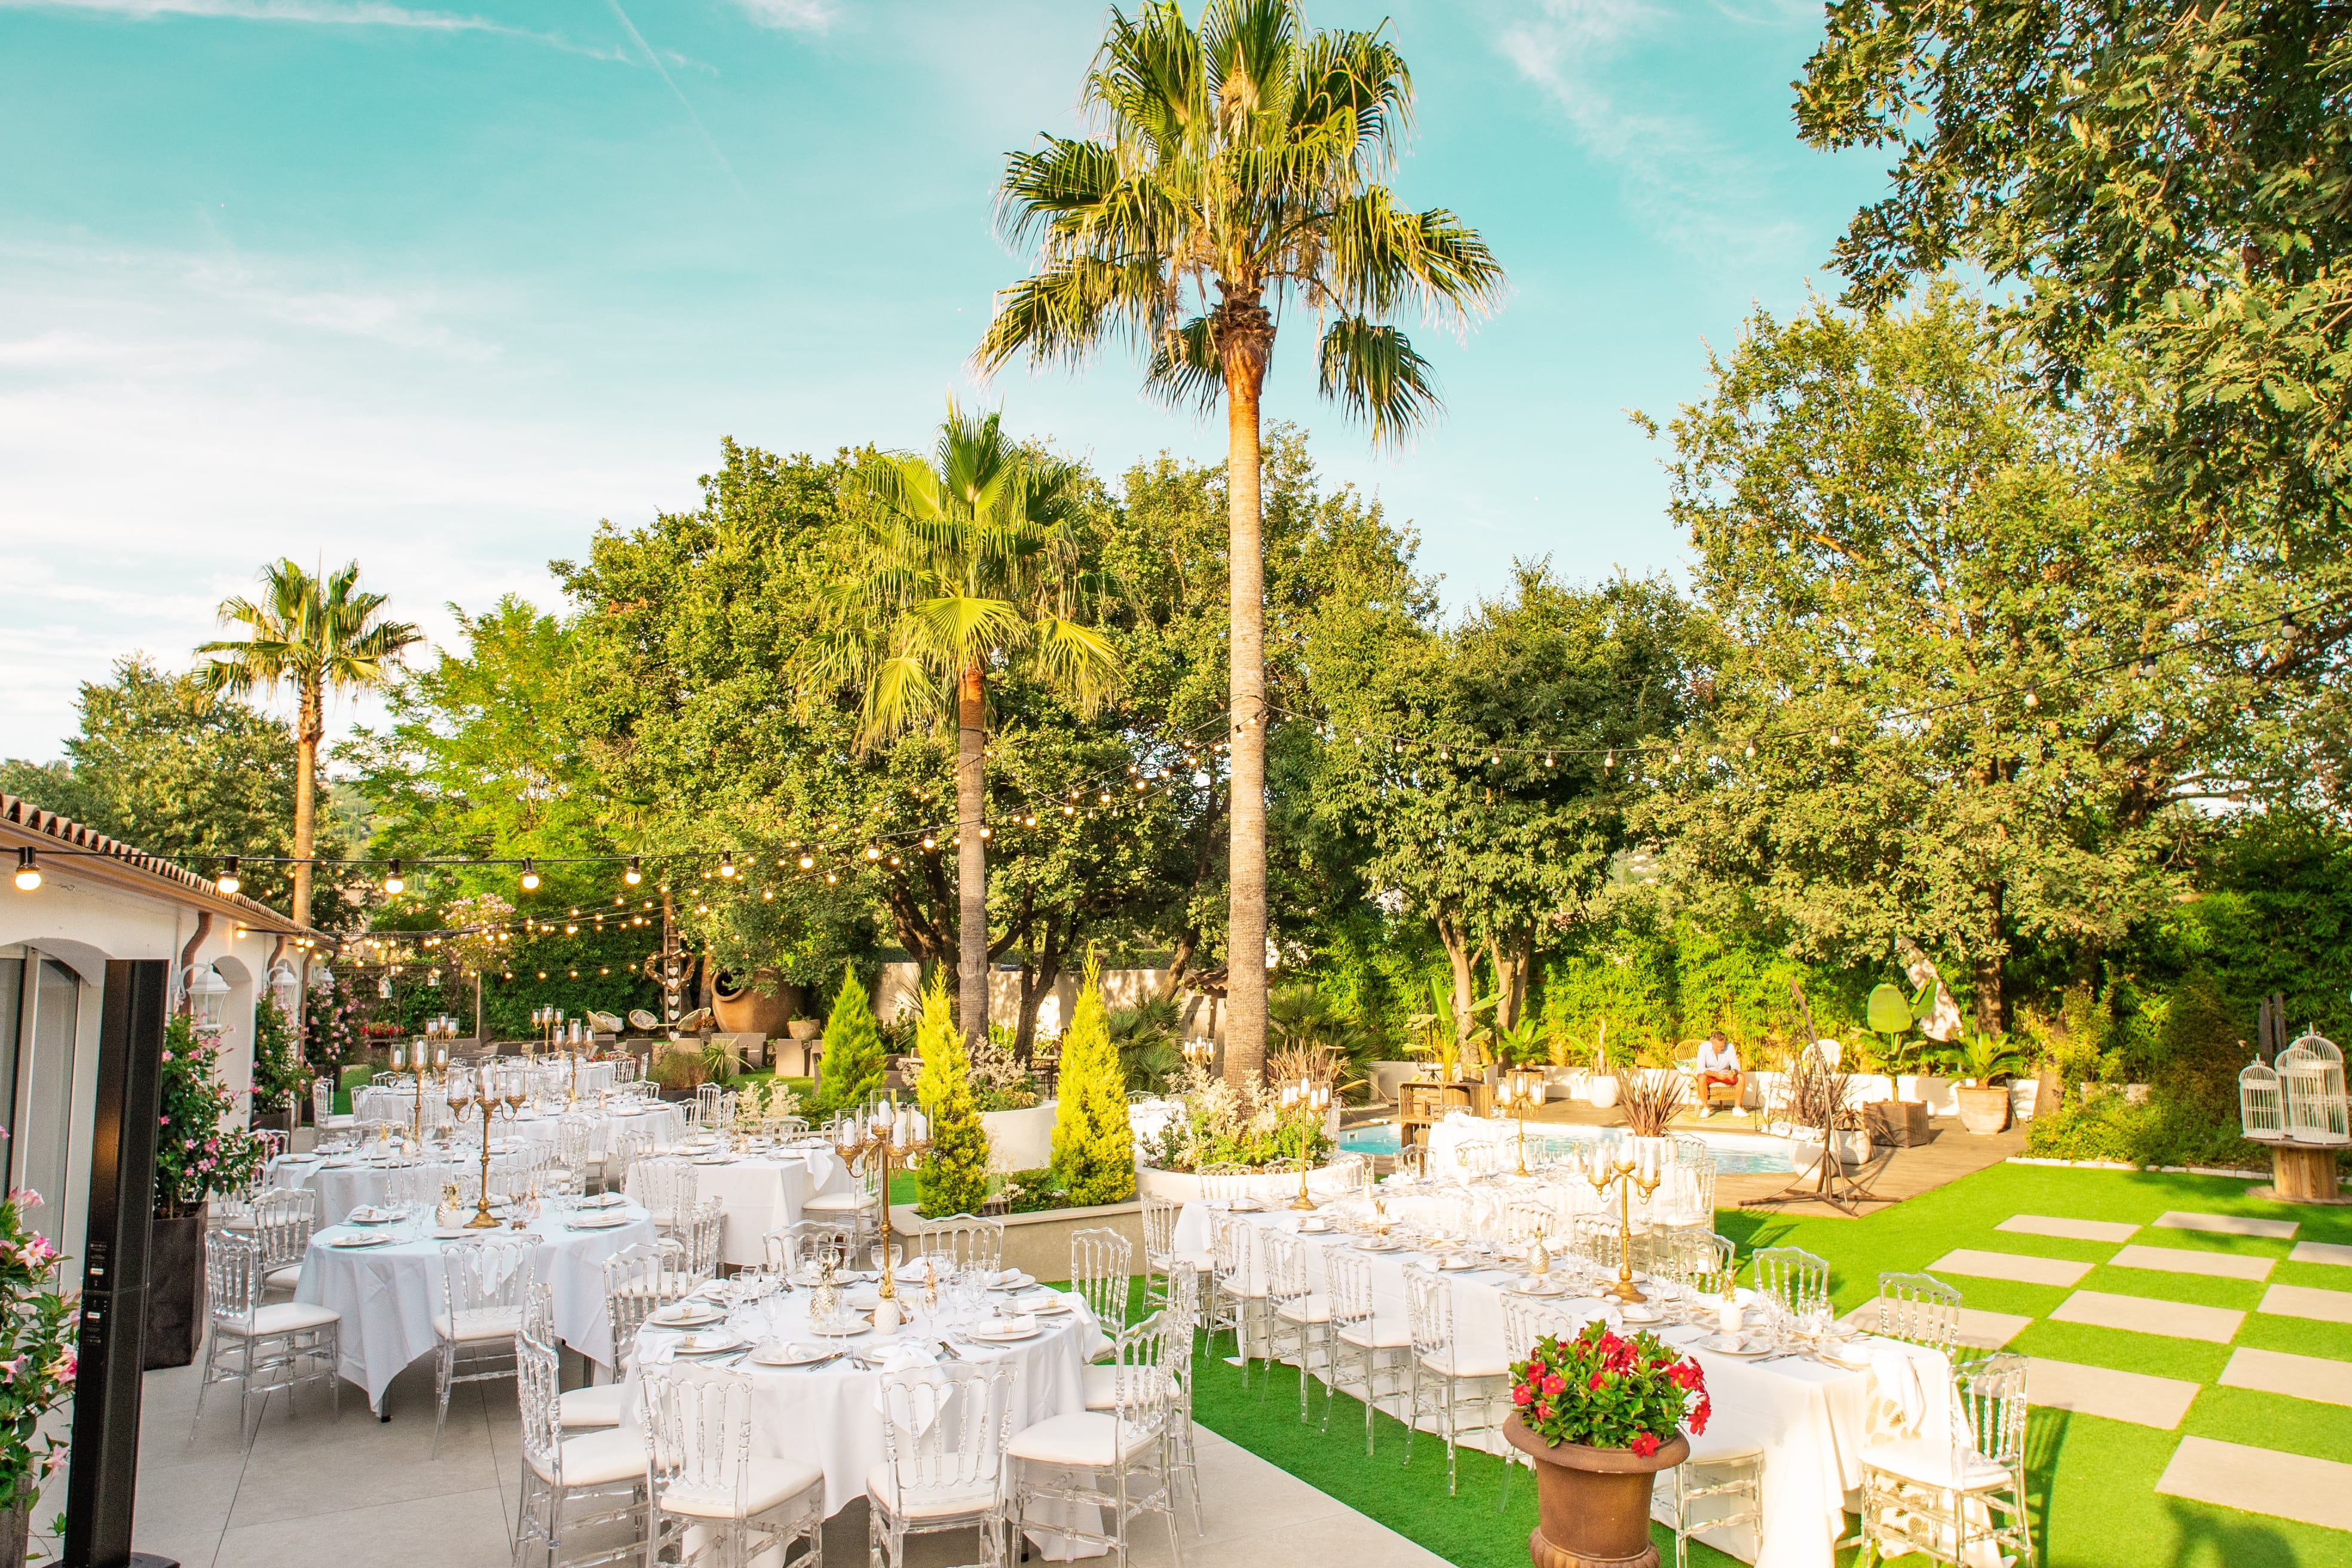 Location Salle Mariage 06 l'occidentale